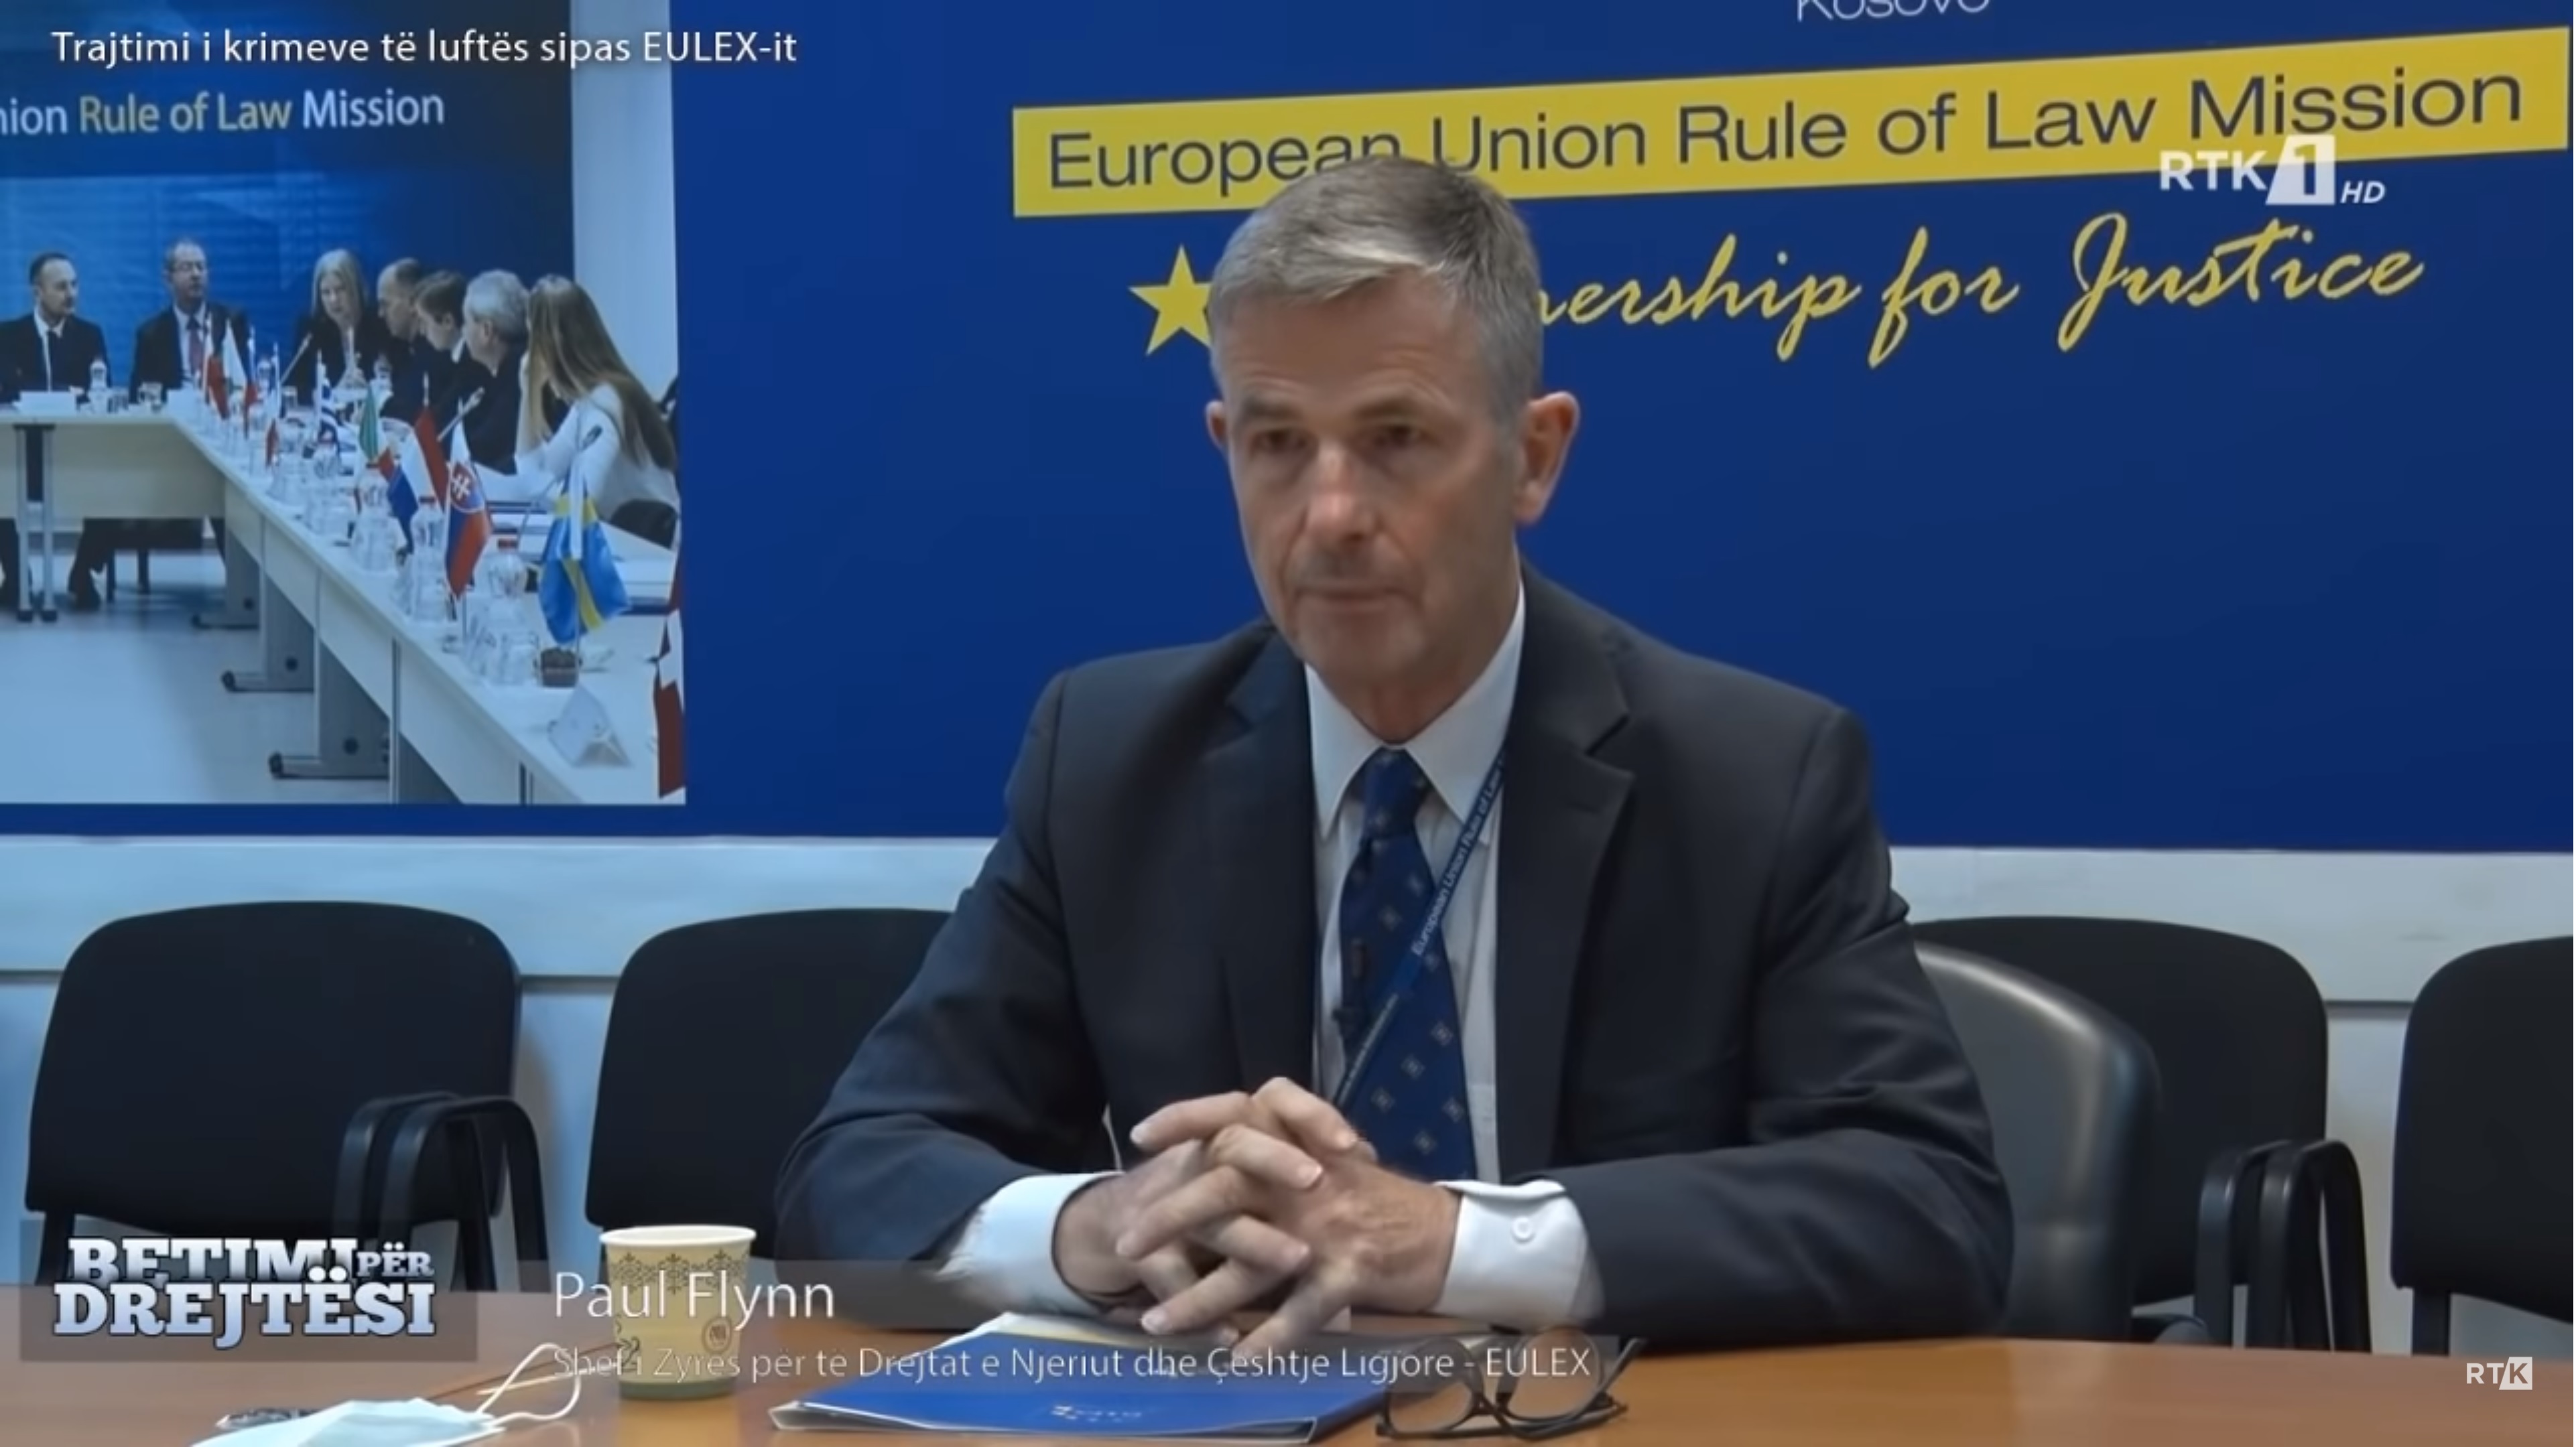 Setting the record straight: Head of EULEX Human Rights and Legal Office speaks for “Betimi për Drejtësi” about the Mission’s past work on war crimes